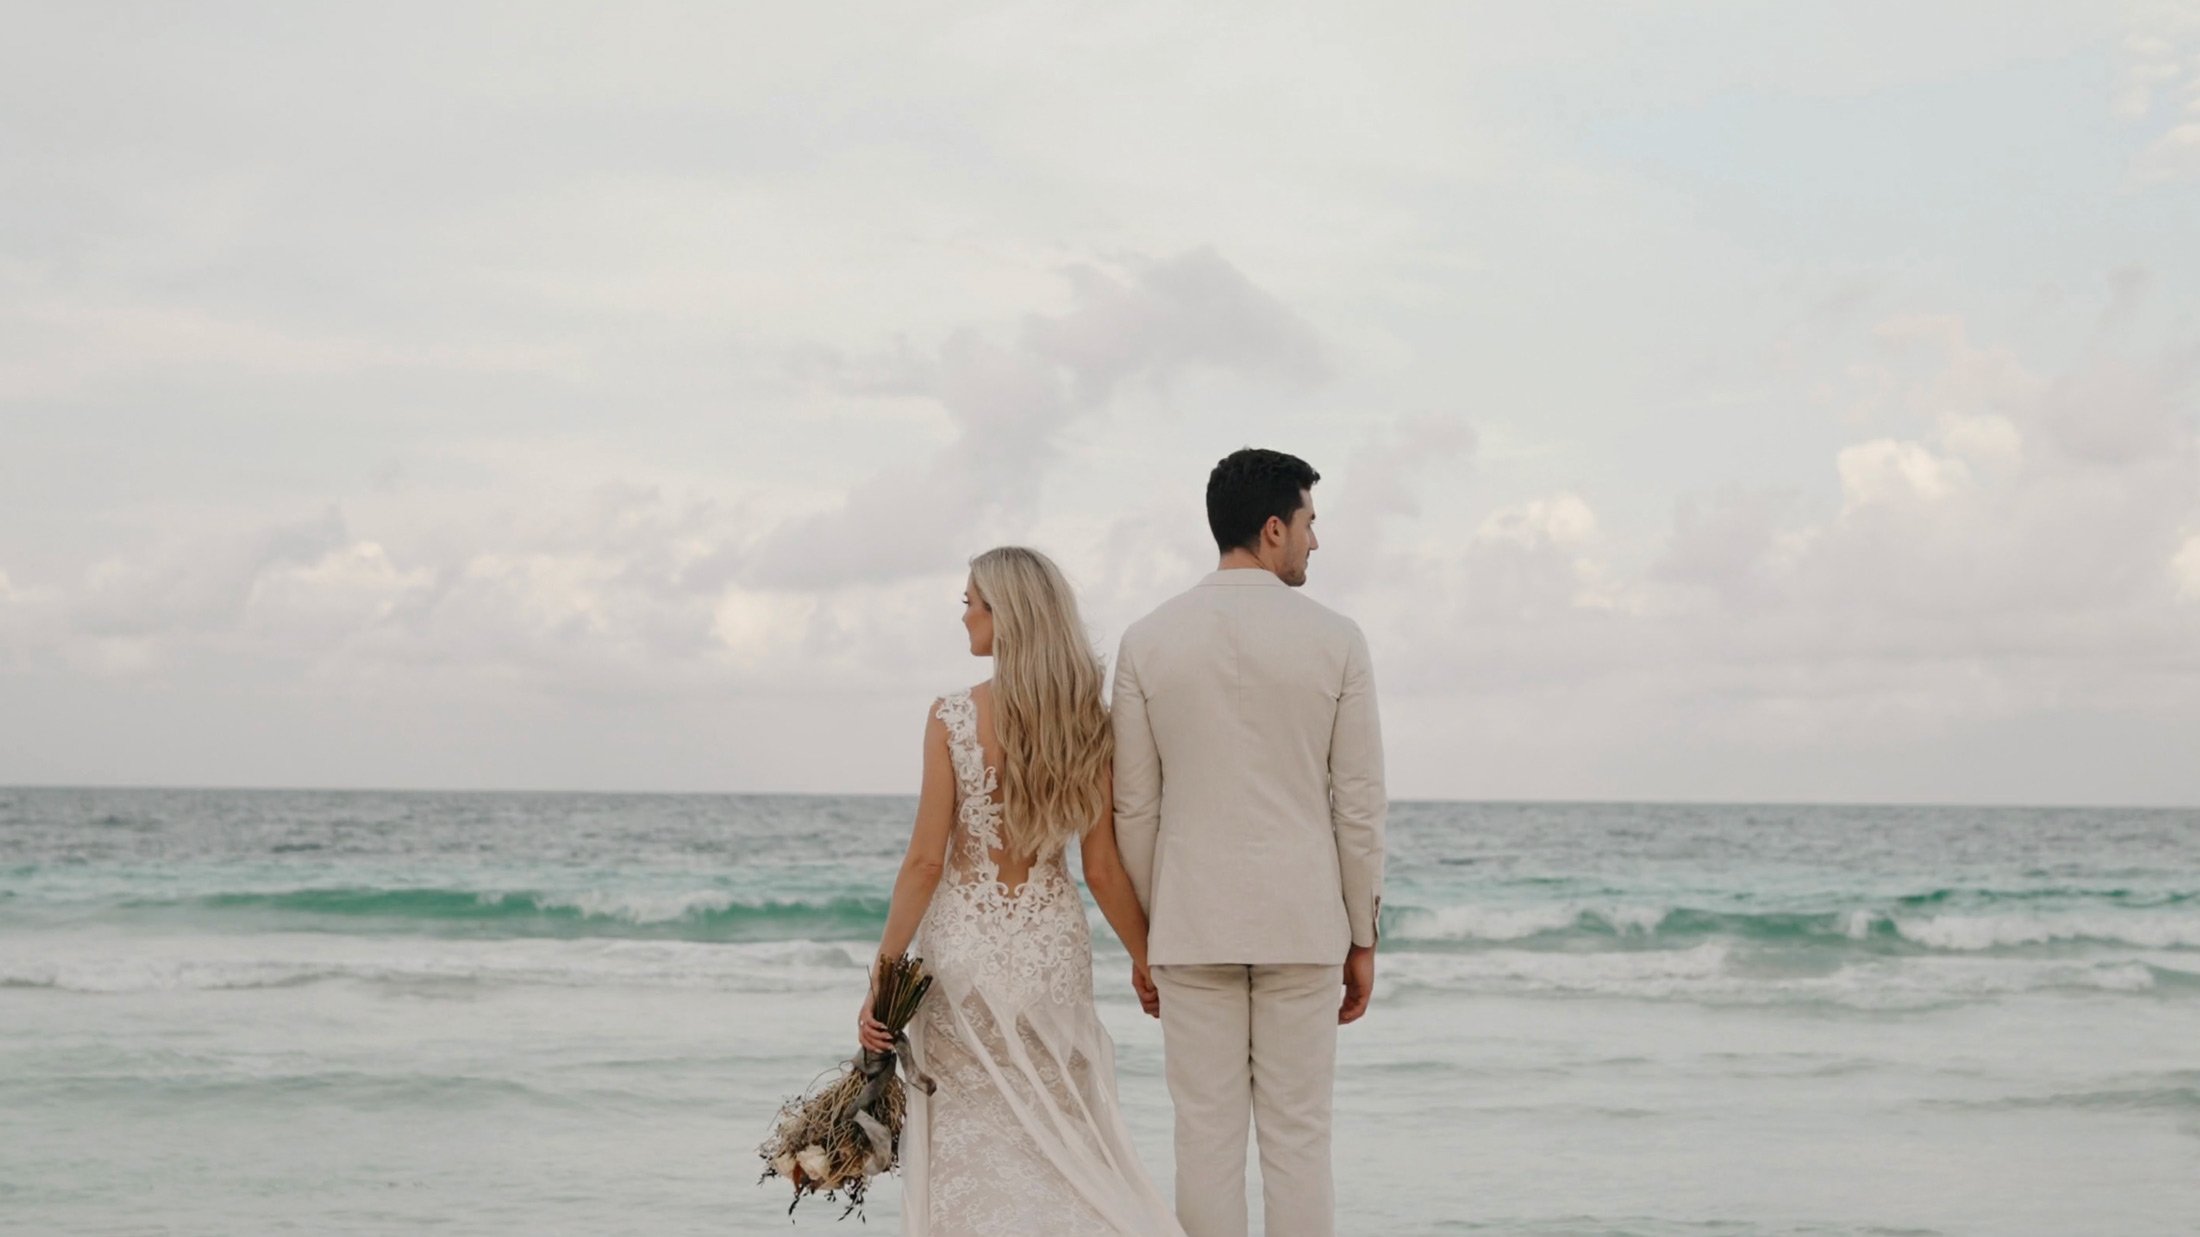 The 10 best wedding videographers we've seen while loaded wedding videos onto The Motion Books.